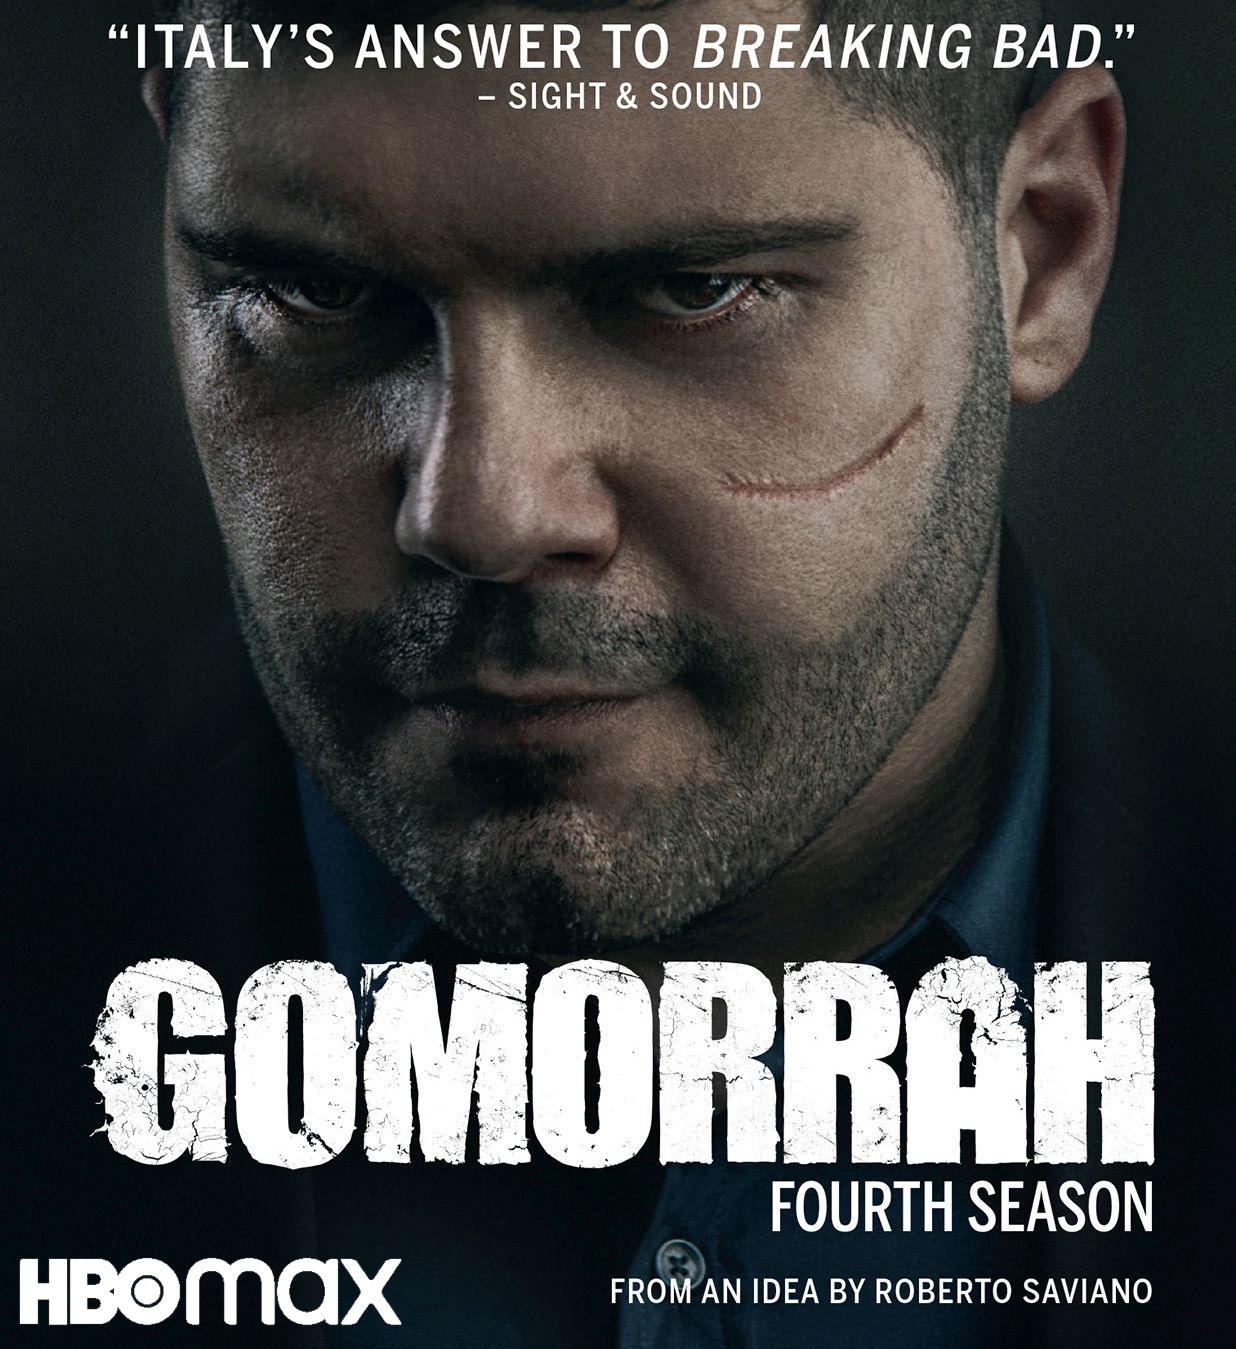 Are the episodes of Gomorrah season 4 available on HBO Max